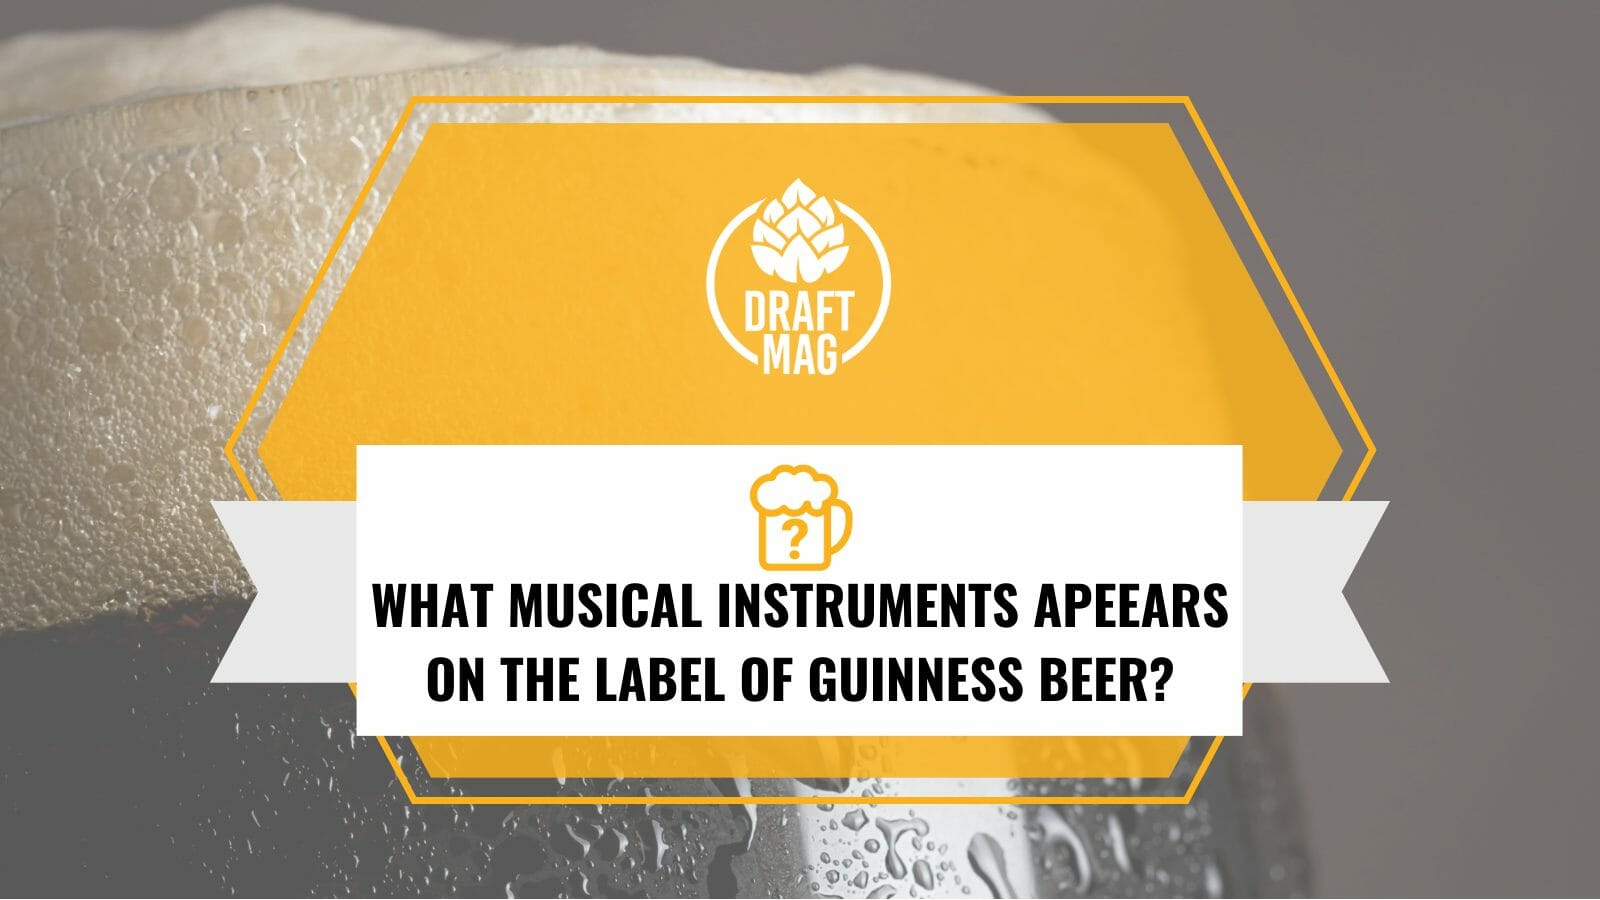 Musical instruments of guinness beer